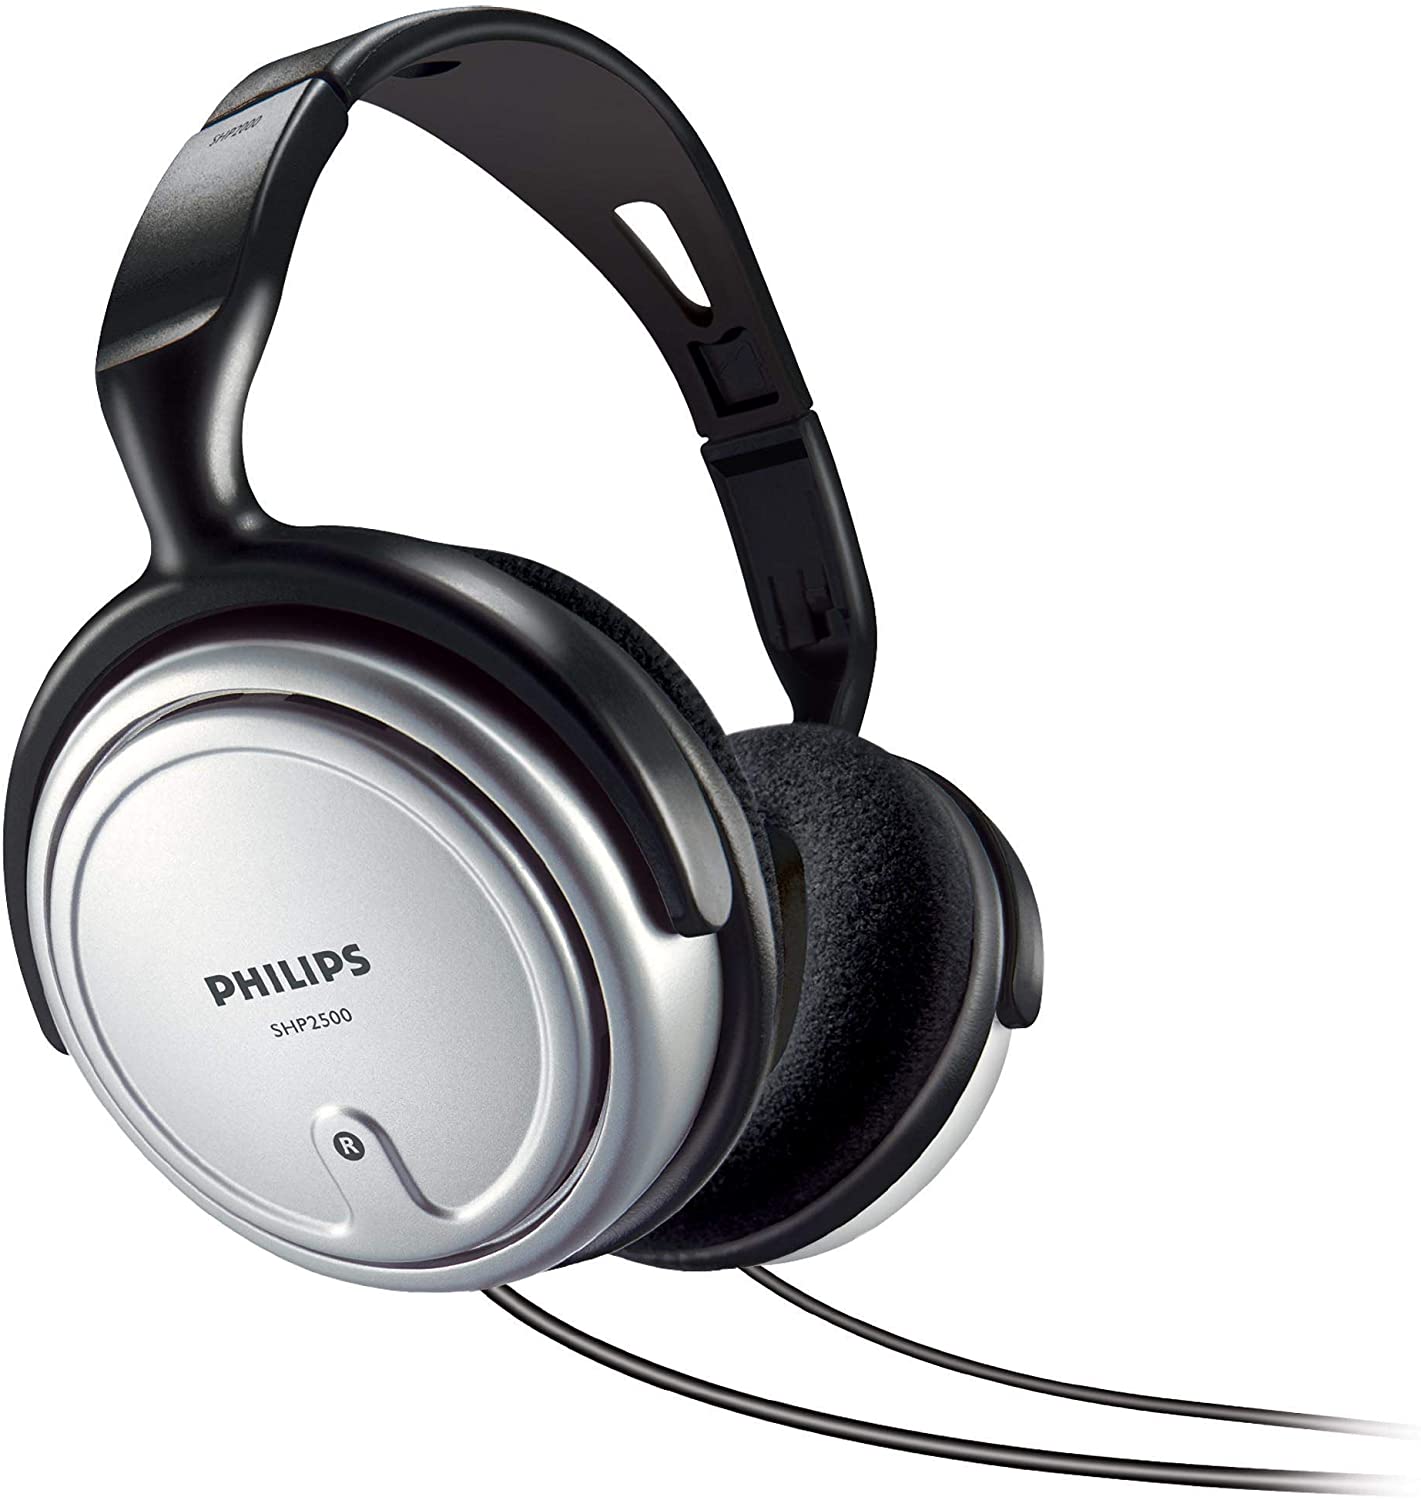 Philips SHP2500/10 Audio Hi-Fi Headphones, TV Headphones with Long Cable (Excellent Sound, Sound Isolation, In-Cord Volume Control, Extra Long 6-m Cable) Silver/Black ds